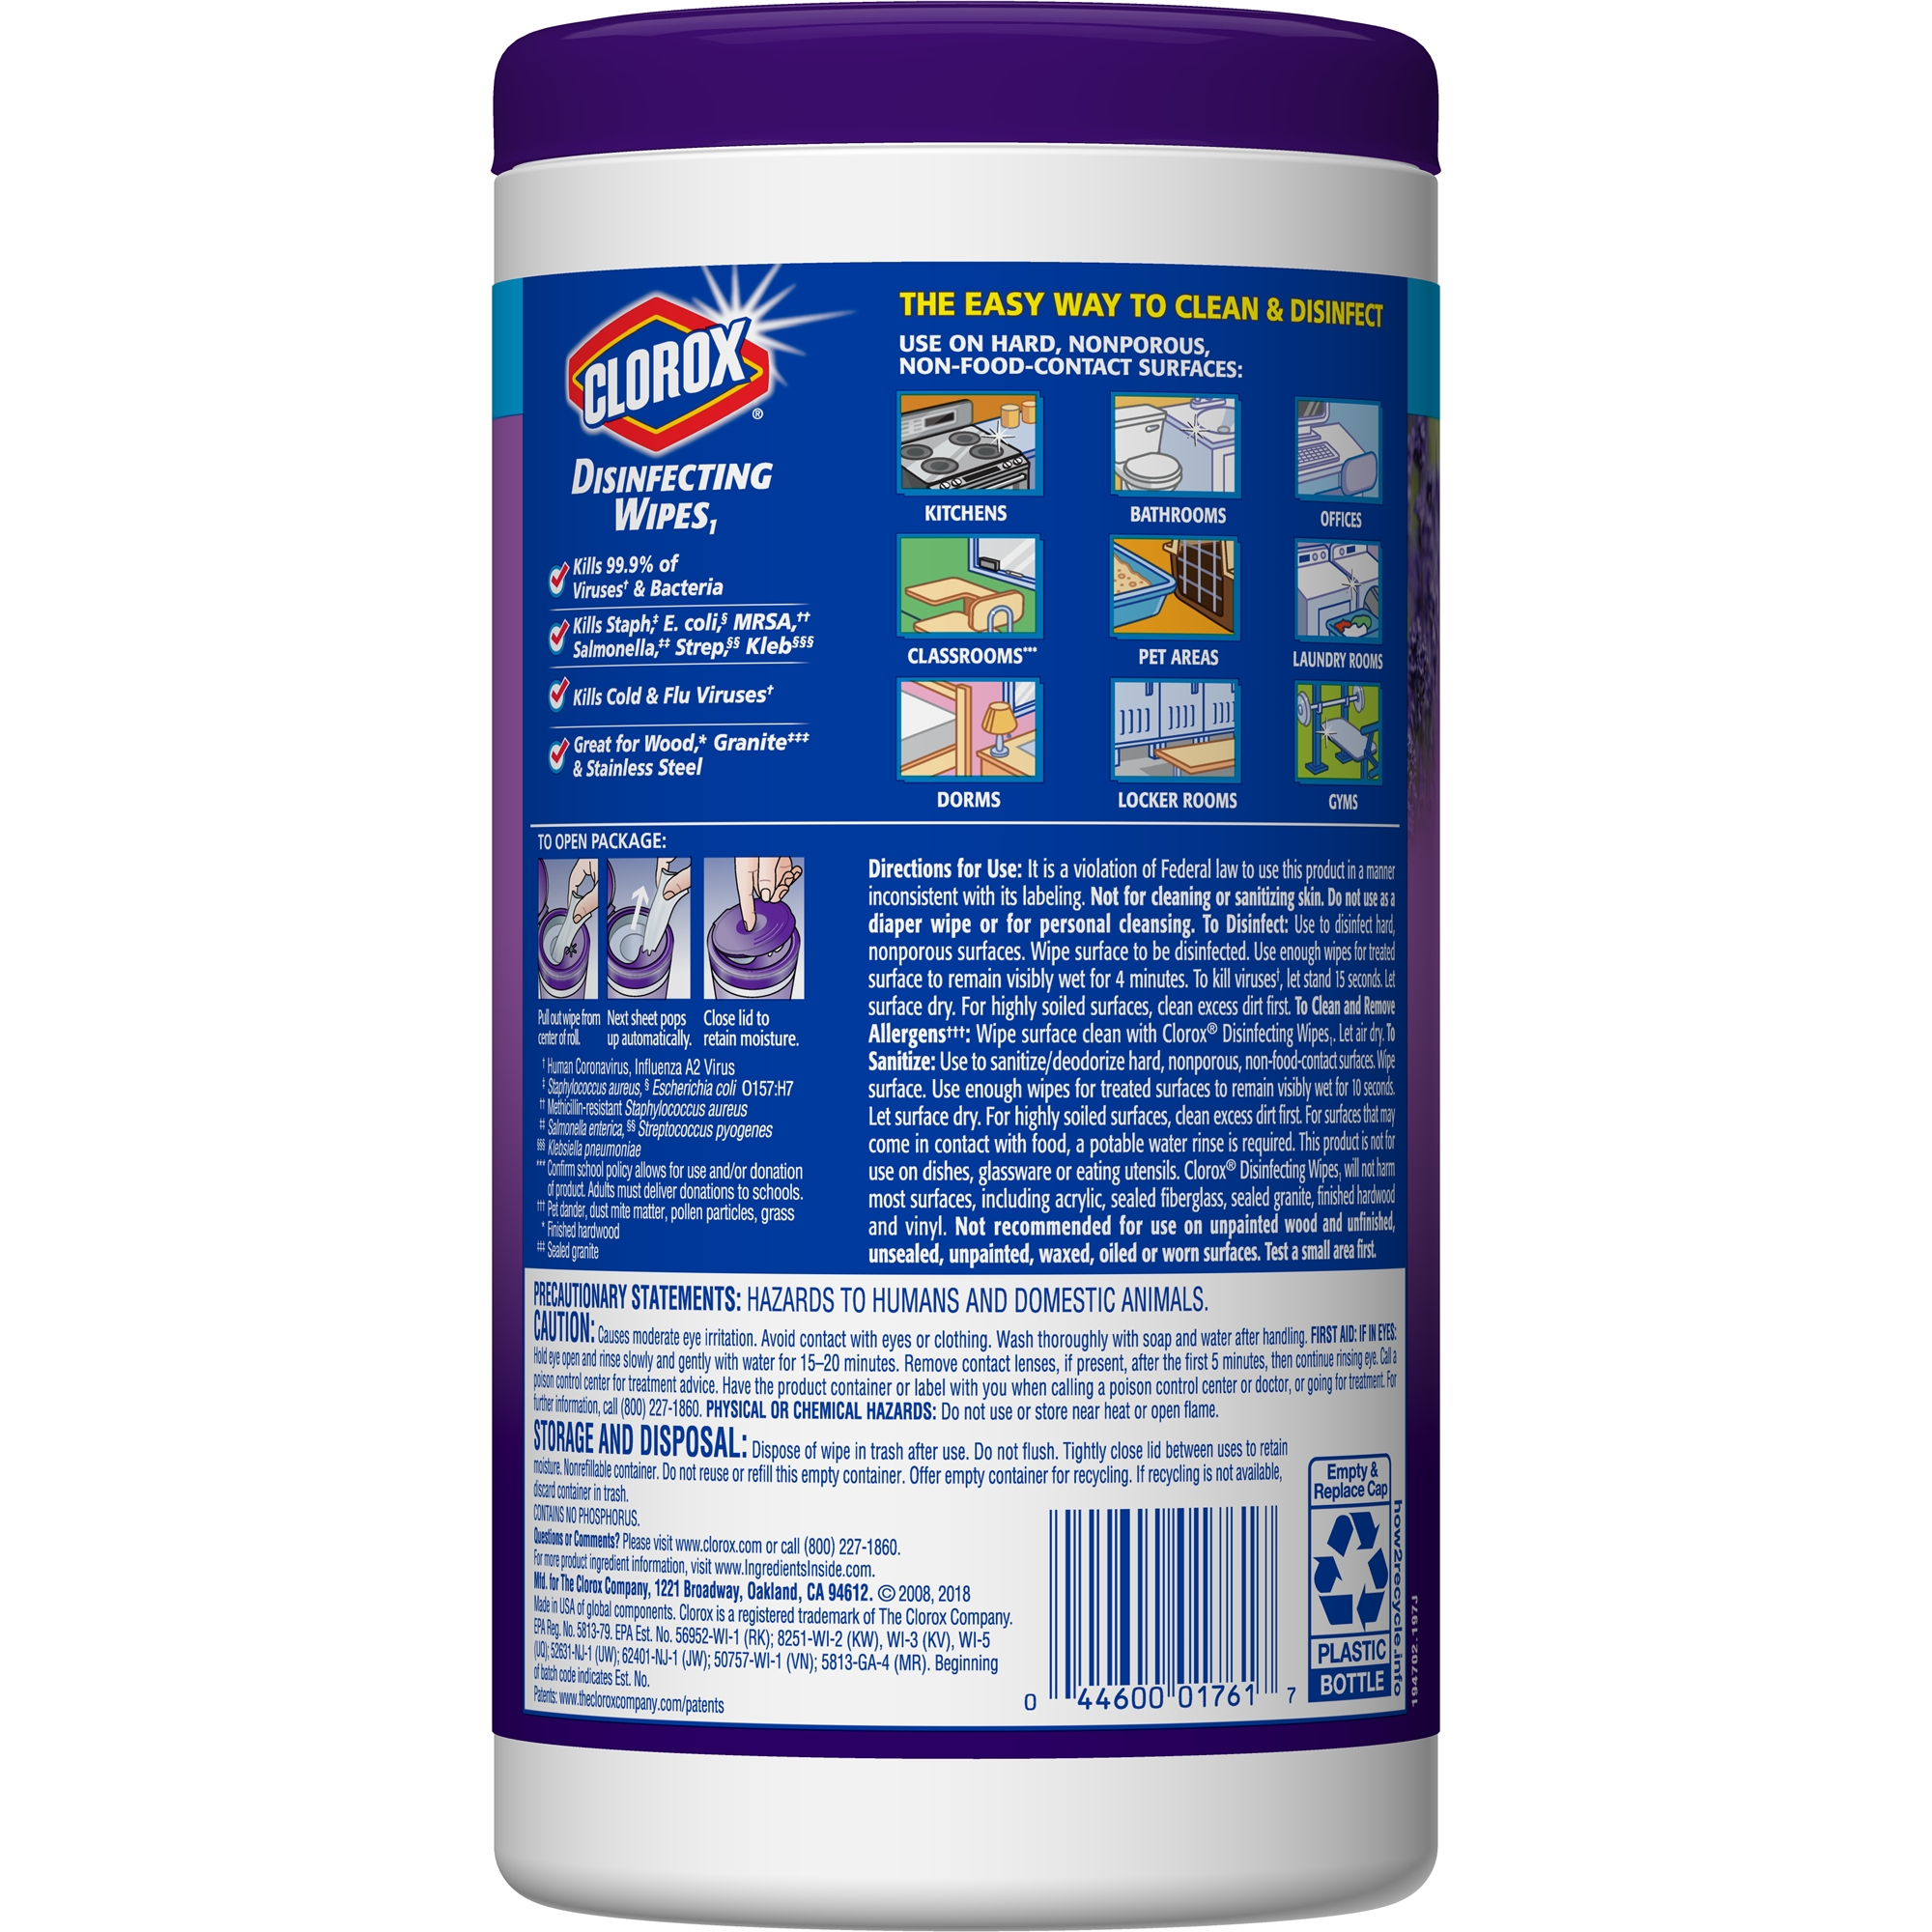 Clorox Disinfecting Wipes, Bleach Free Cleaning Wipes - Fresh Lavender, 75 ct - image 4 of 8